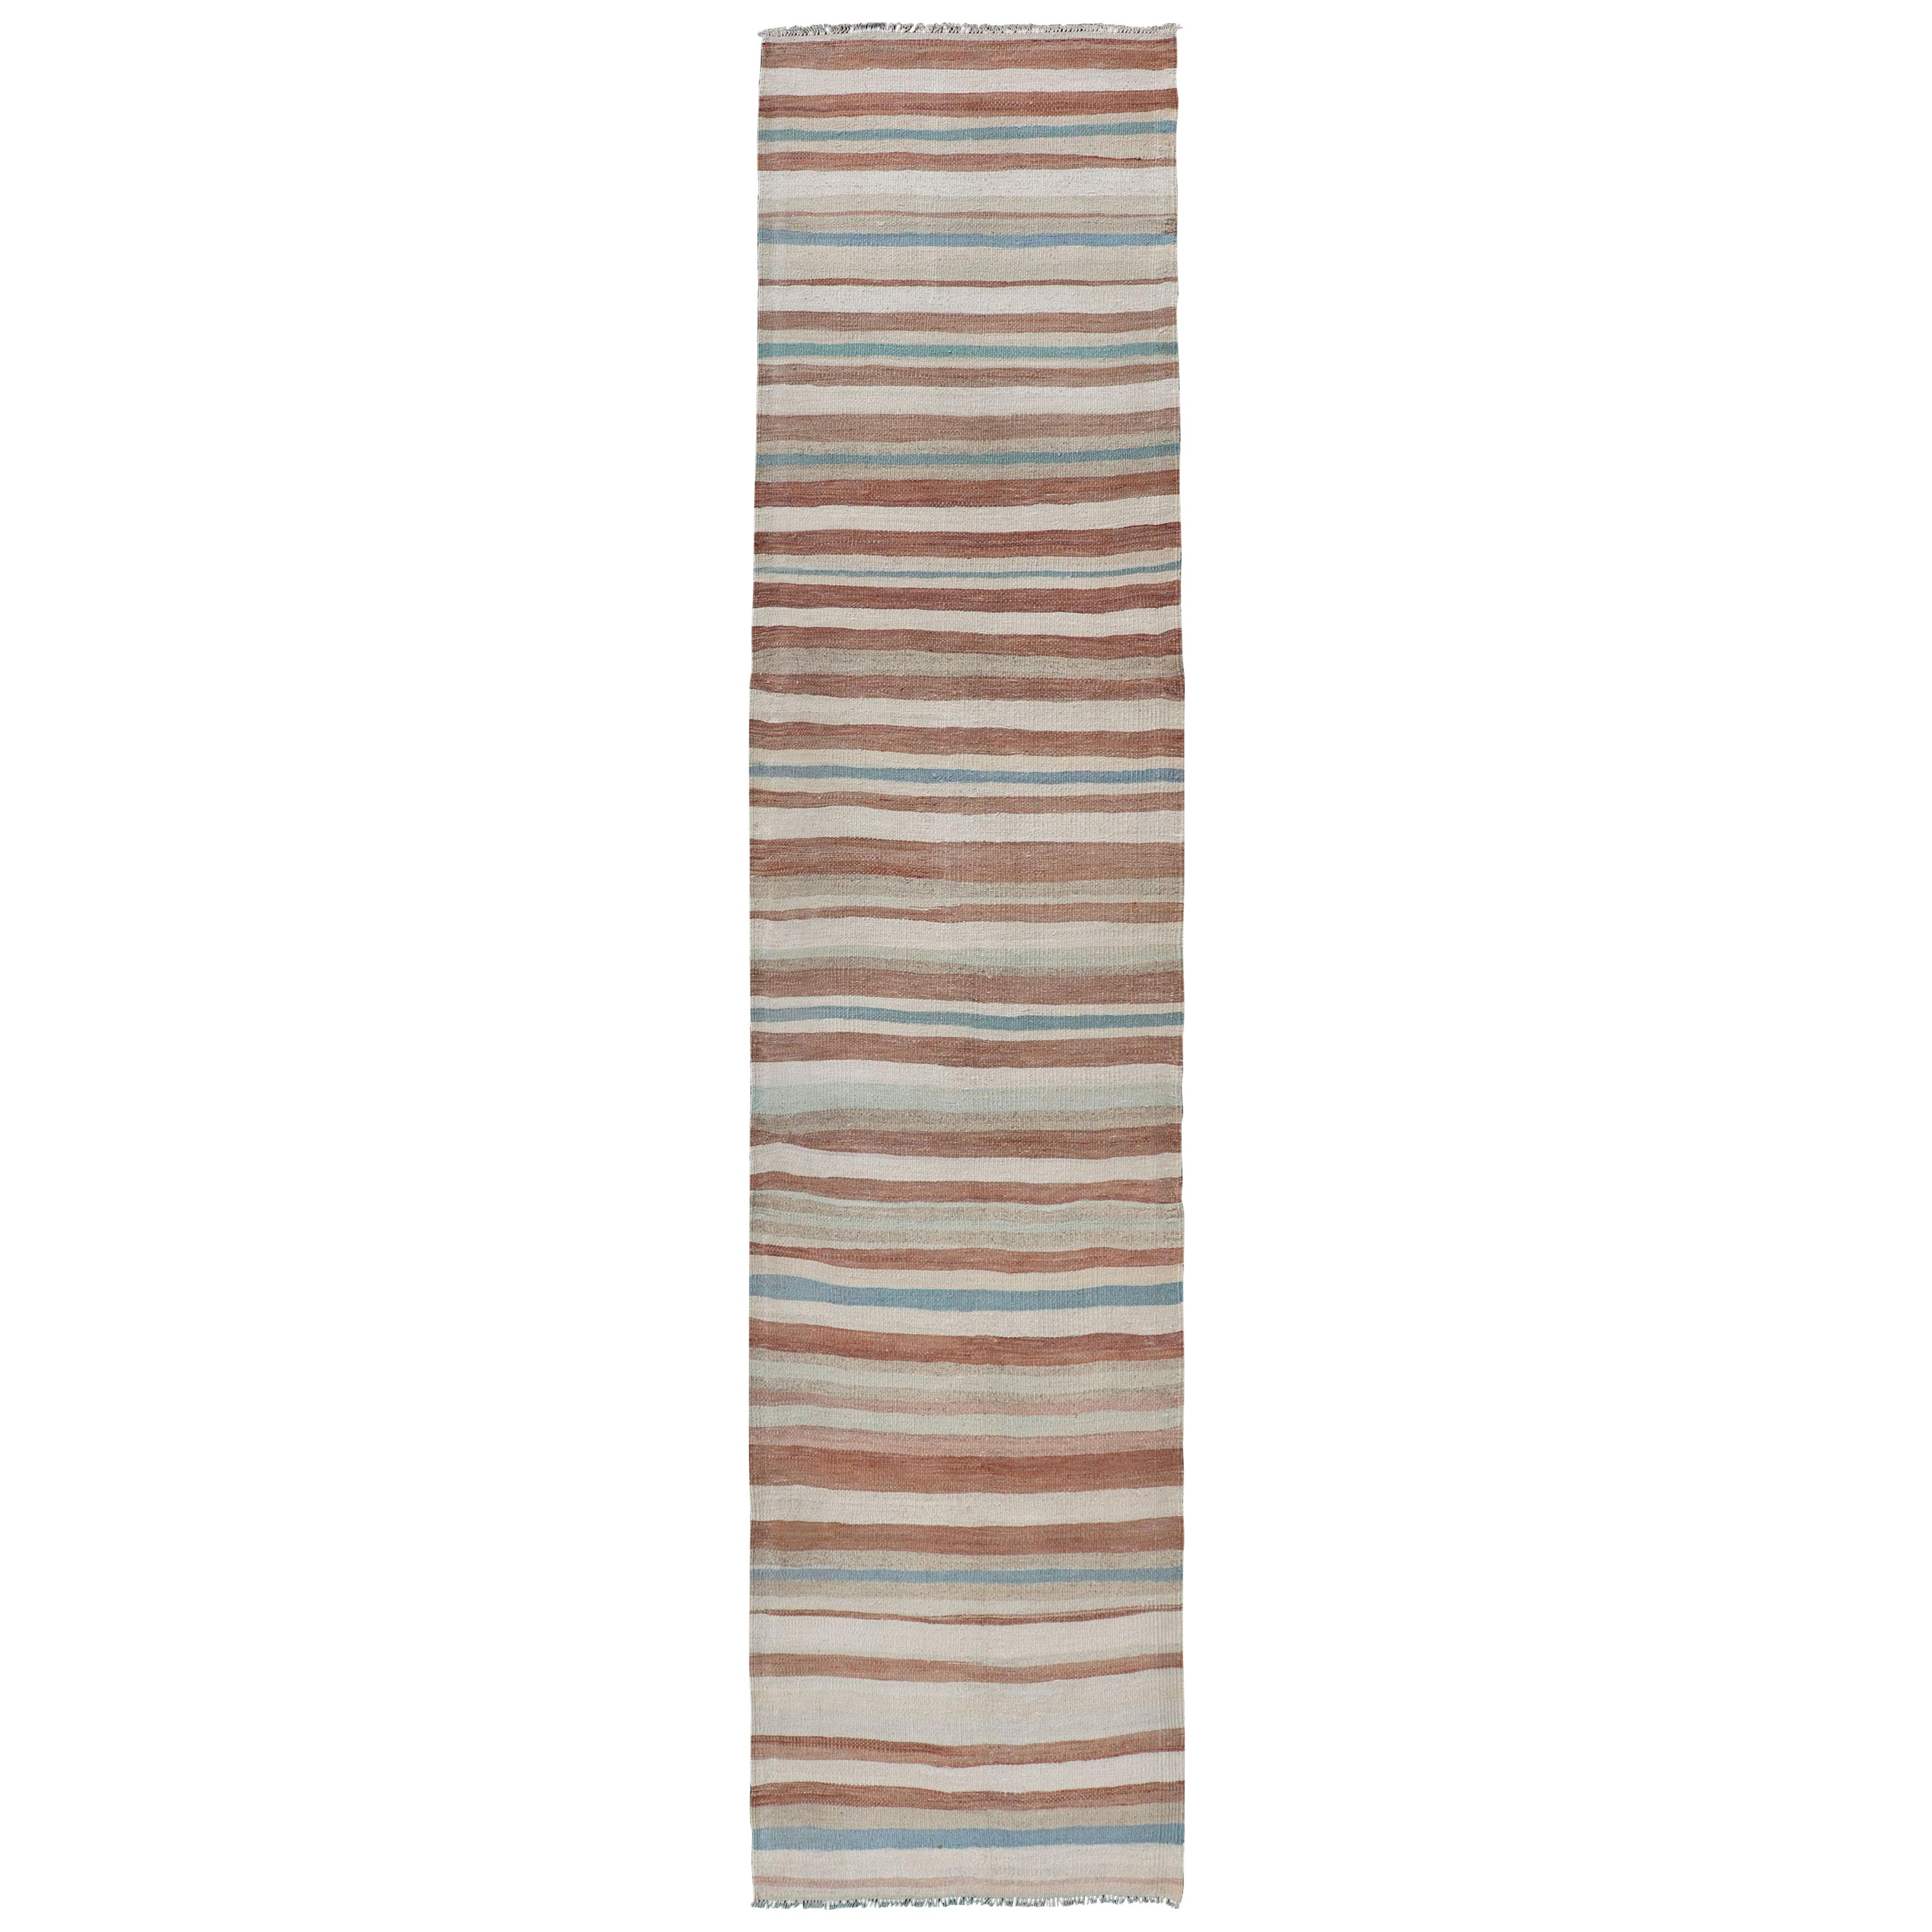 Striped Vintage Turkish Kilim Runner in Shades of Brown, Cream, and Blue For Sale